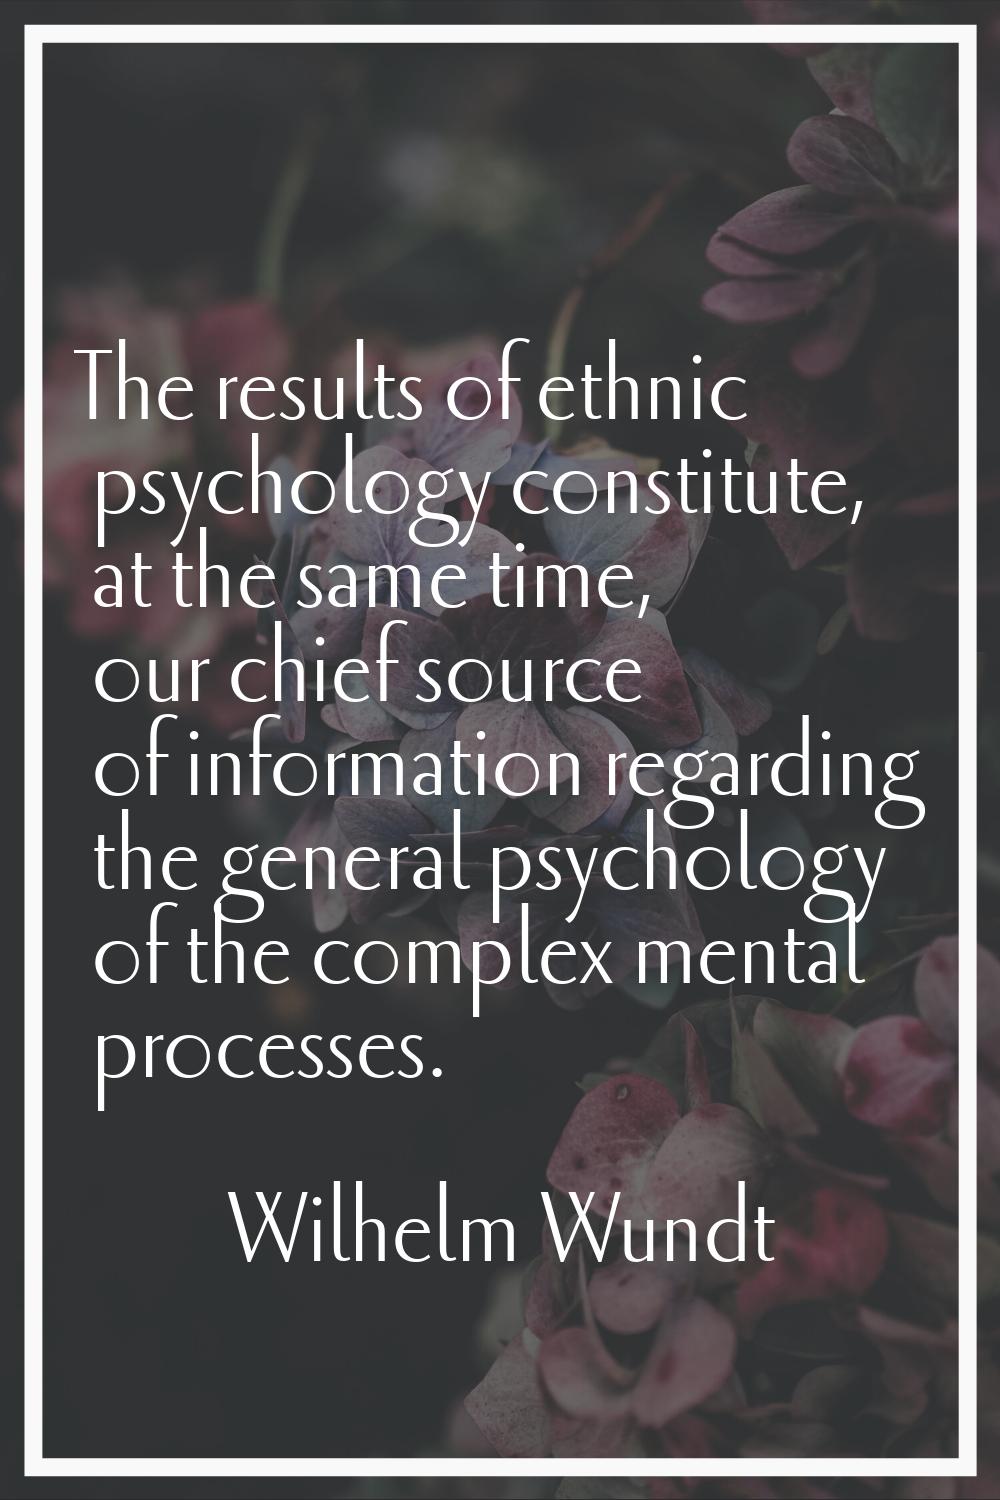 The results of ethnic psychology constitute, at the same time, our chief source of information rega